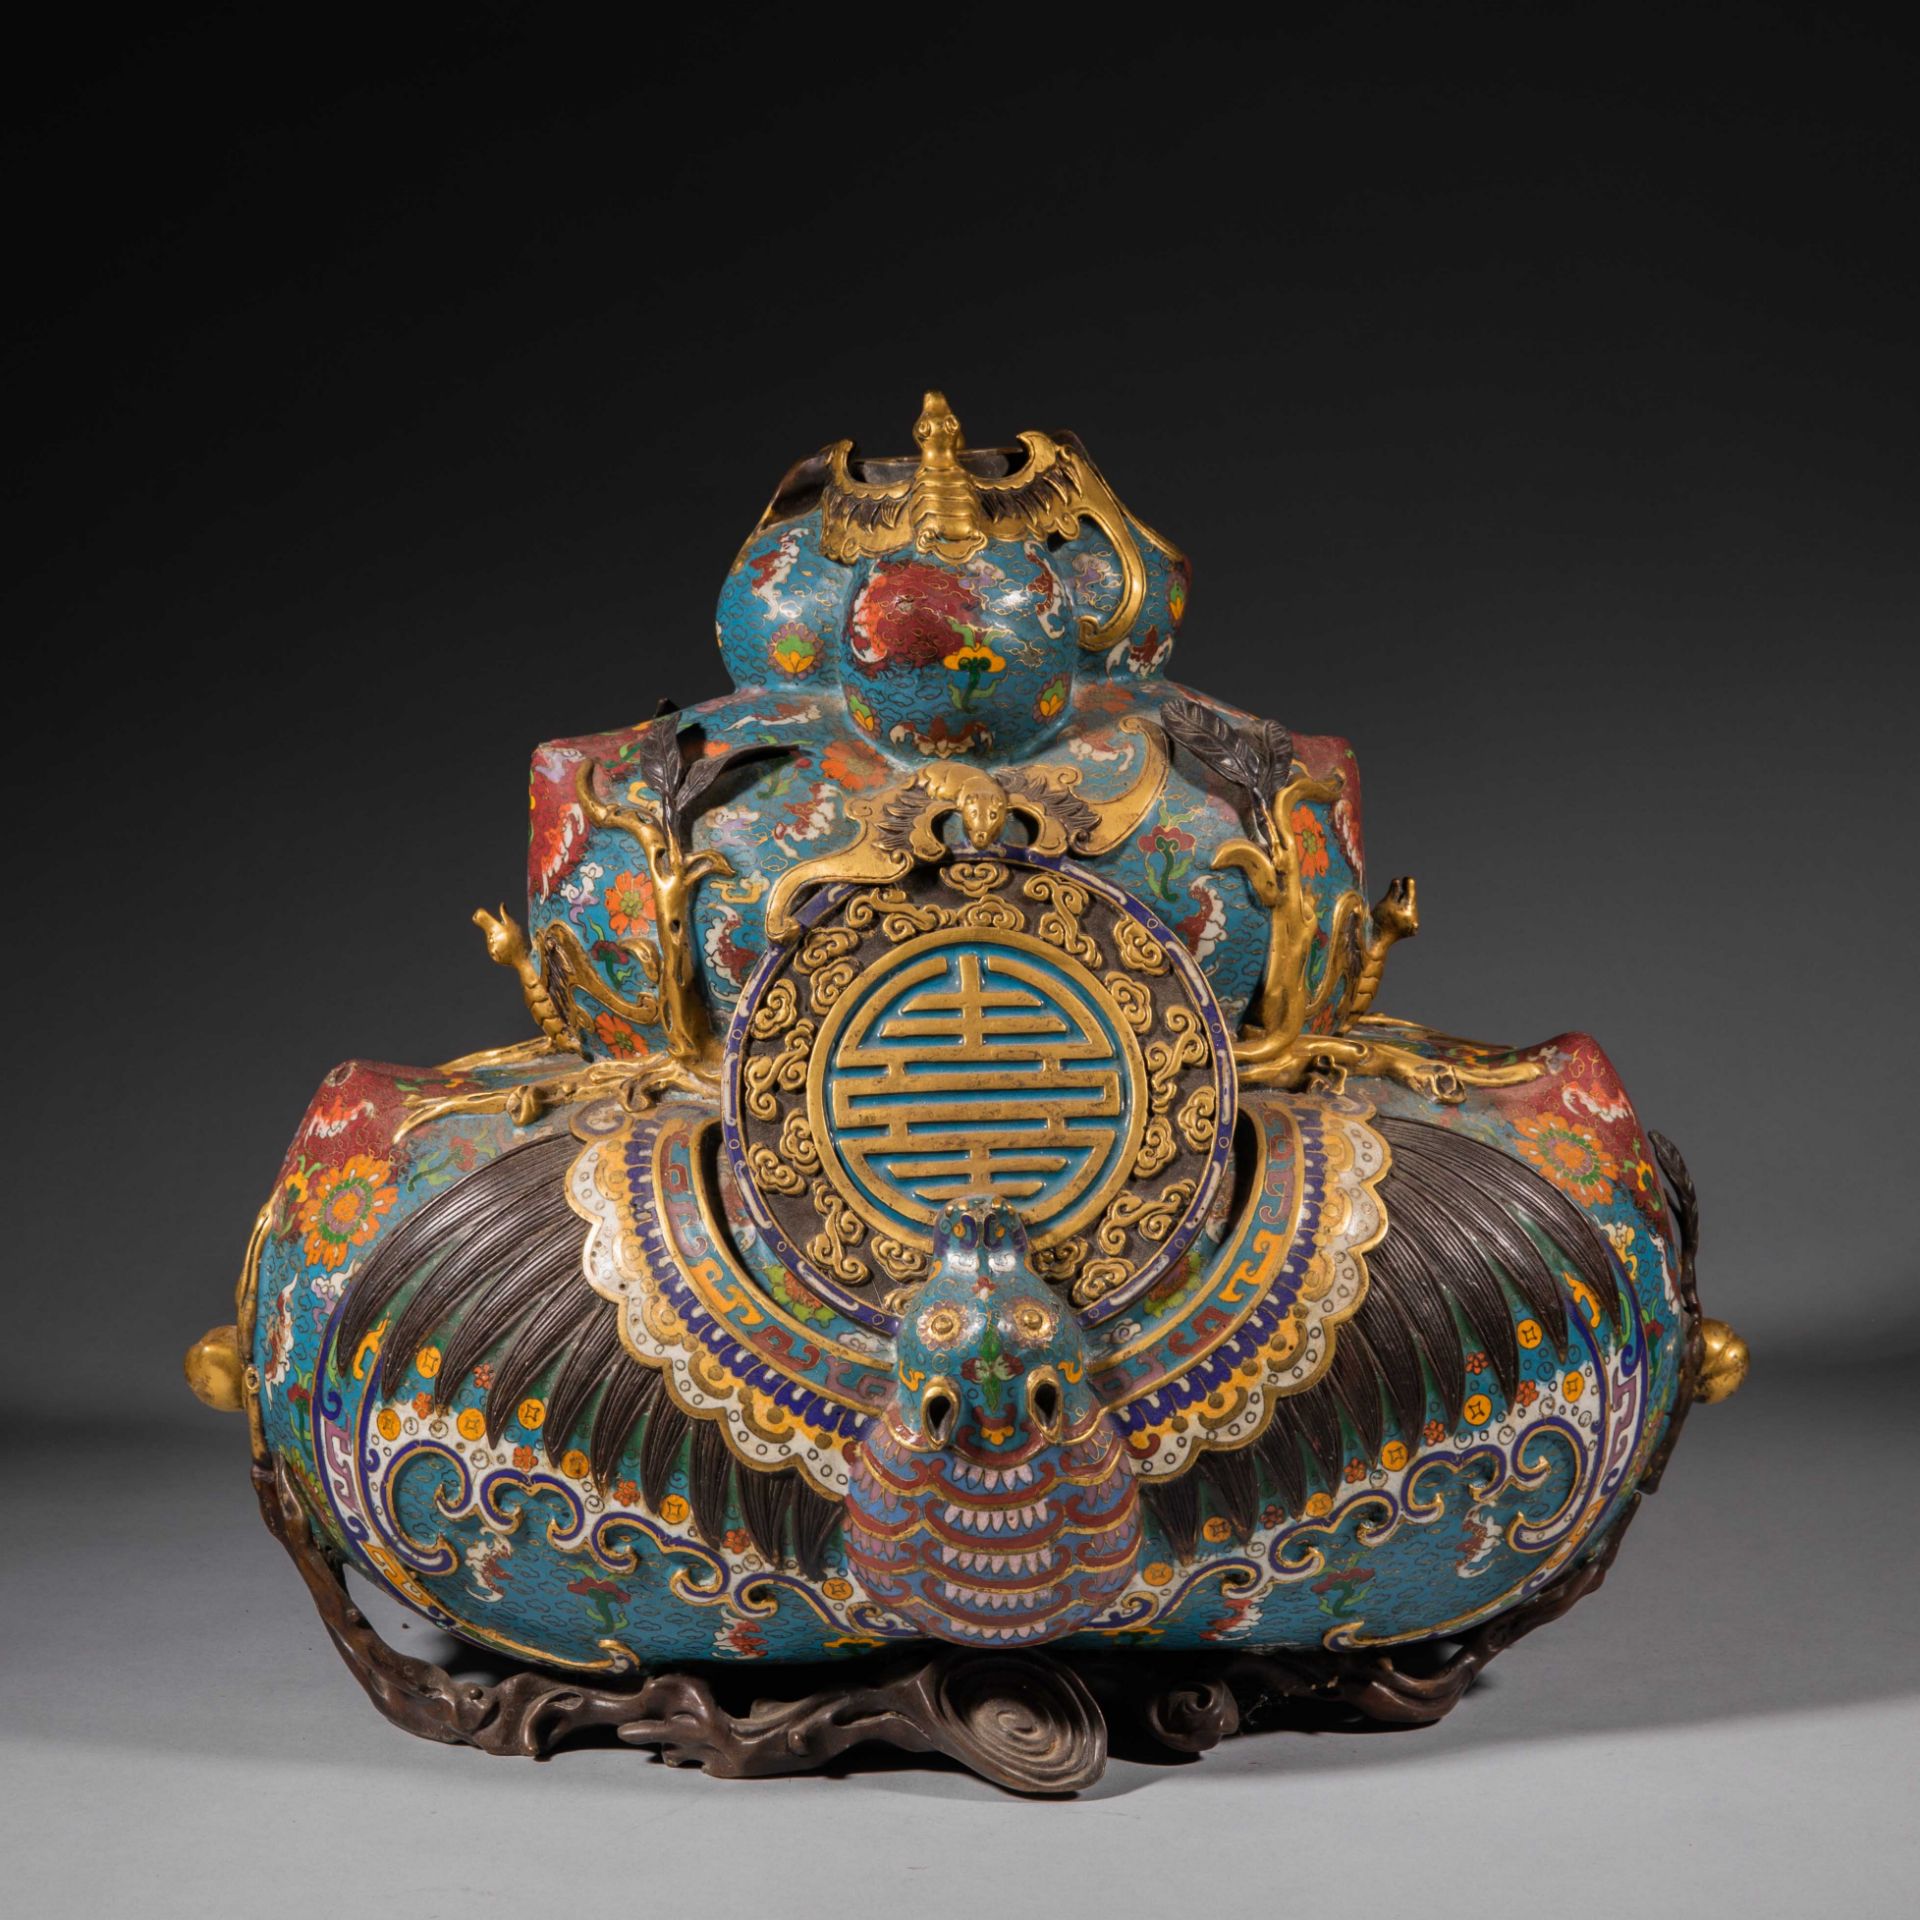 A Qianlong-marked Cloisonne Vase, Qing Dynasty, China - Image 10 of 12